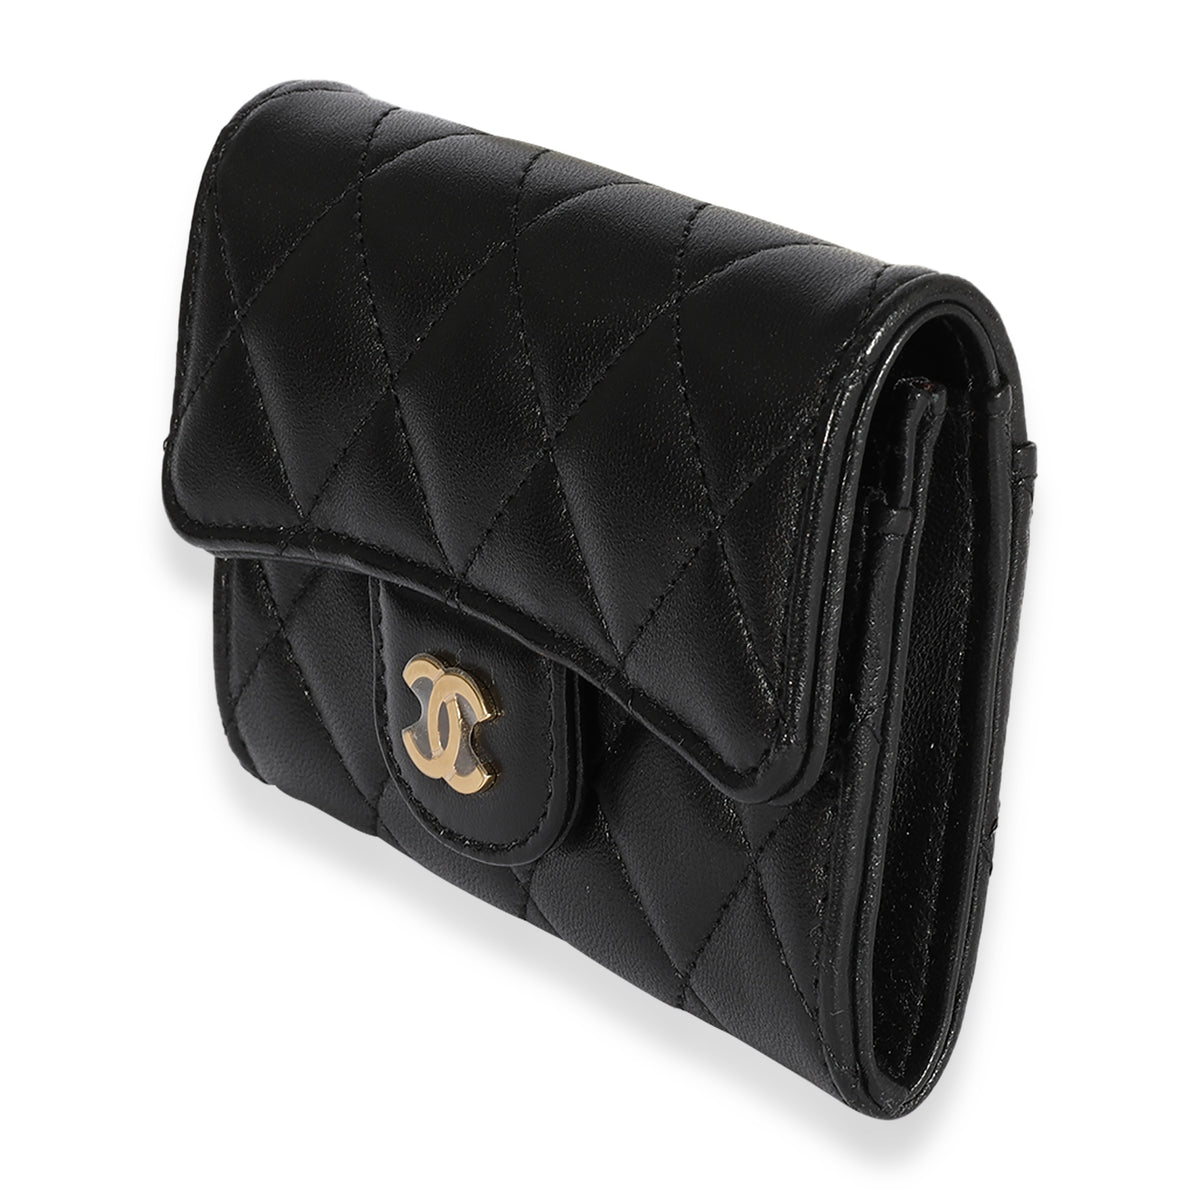 CHANEL Lambskin Quilted Flap Card Holder Black | FASHIONPHILE